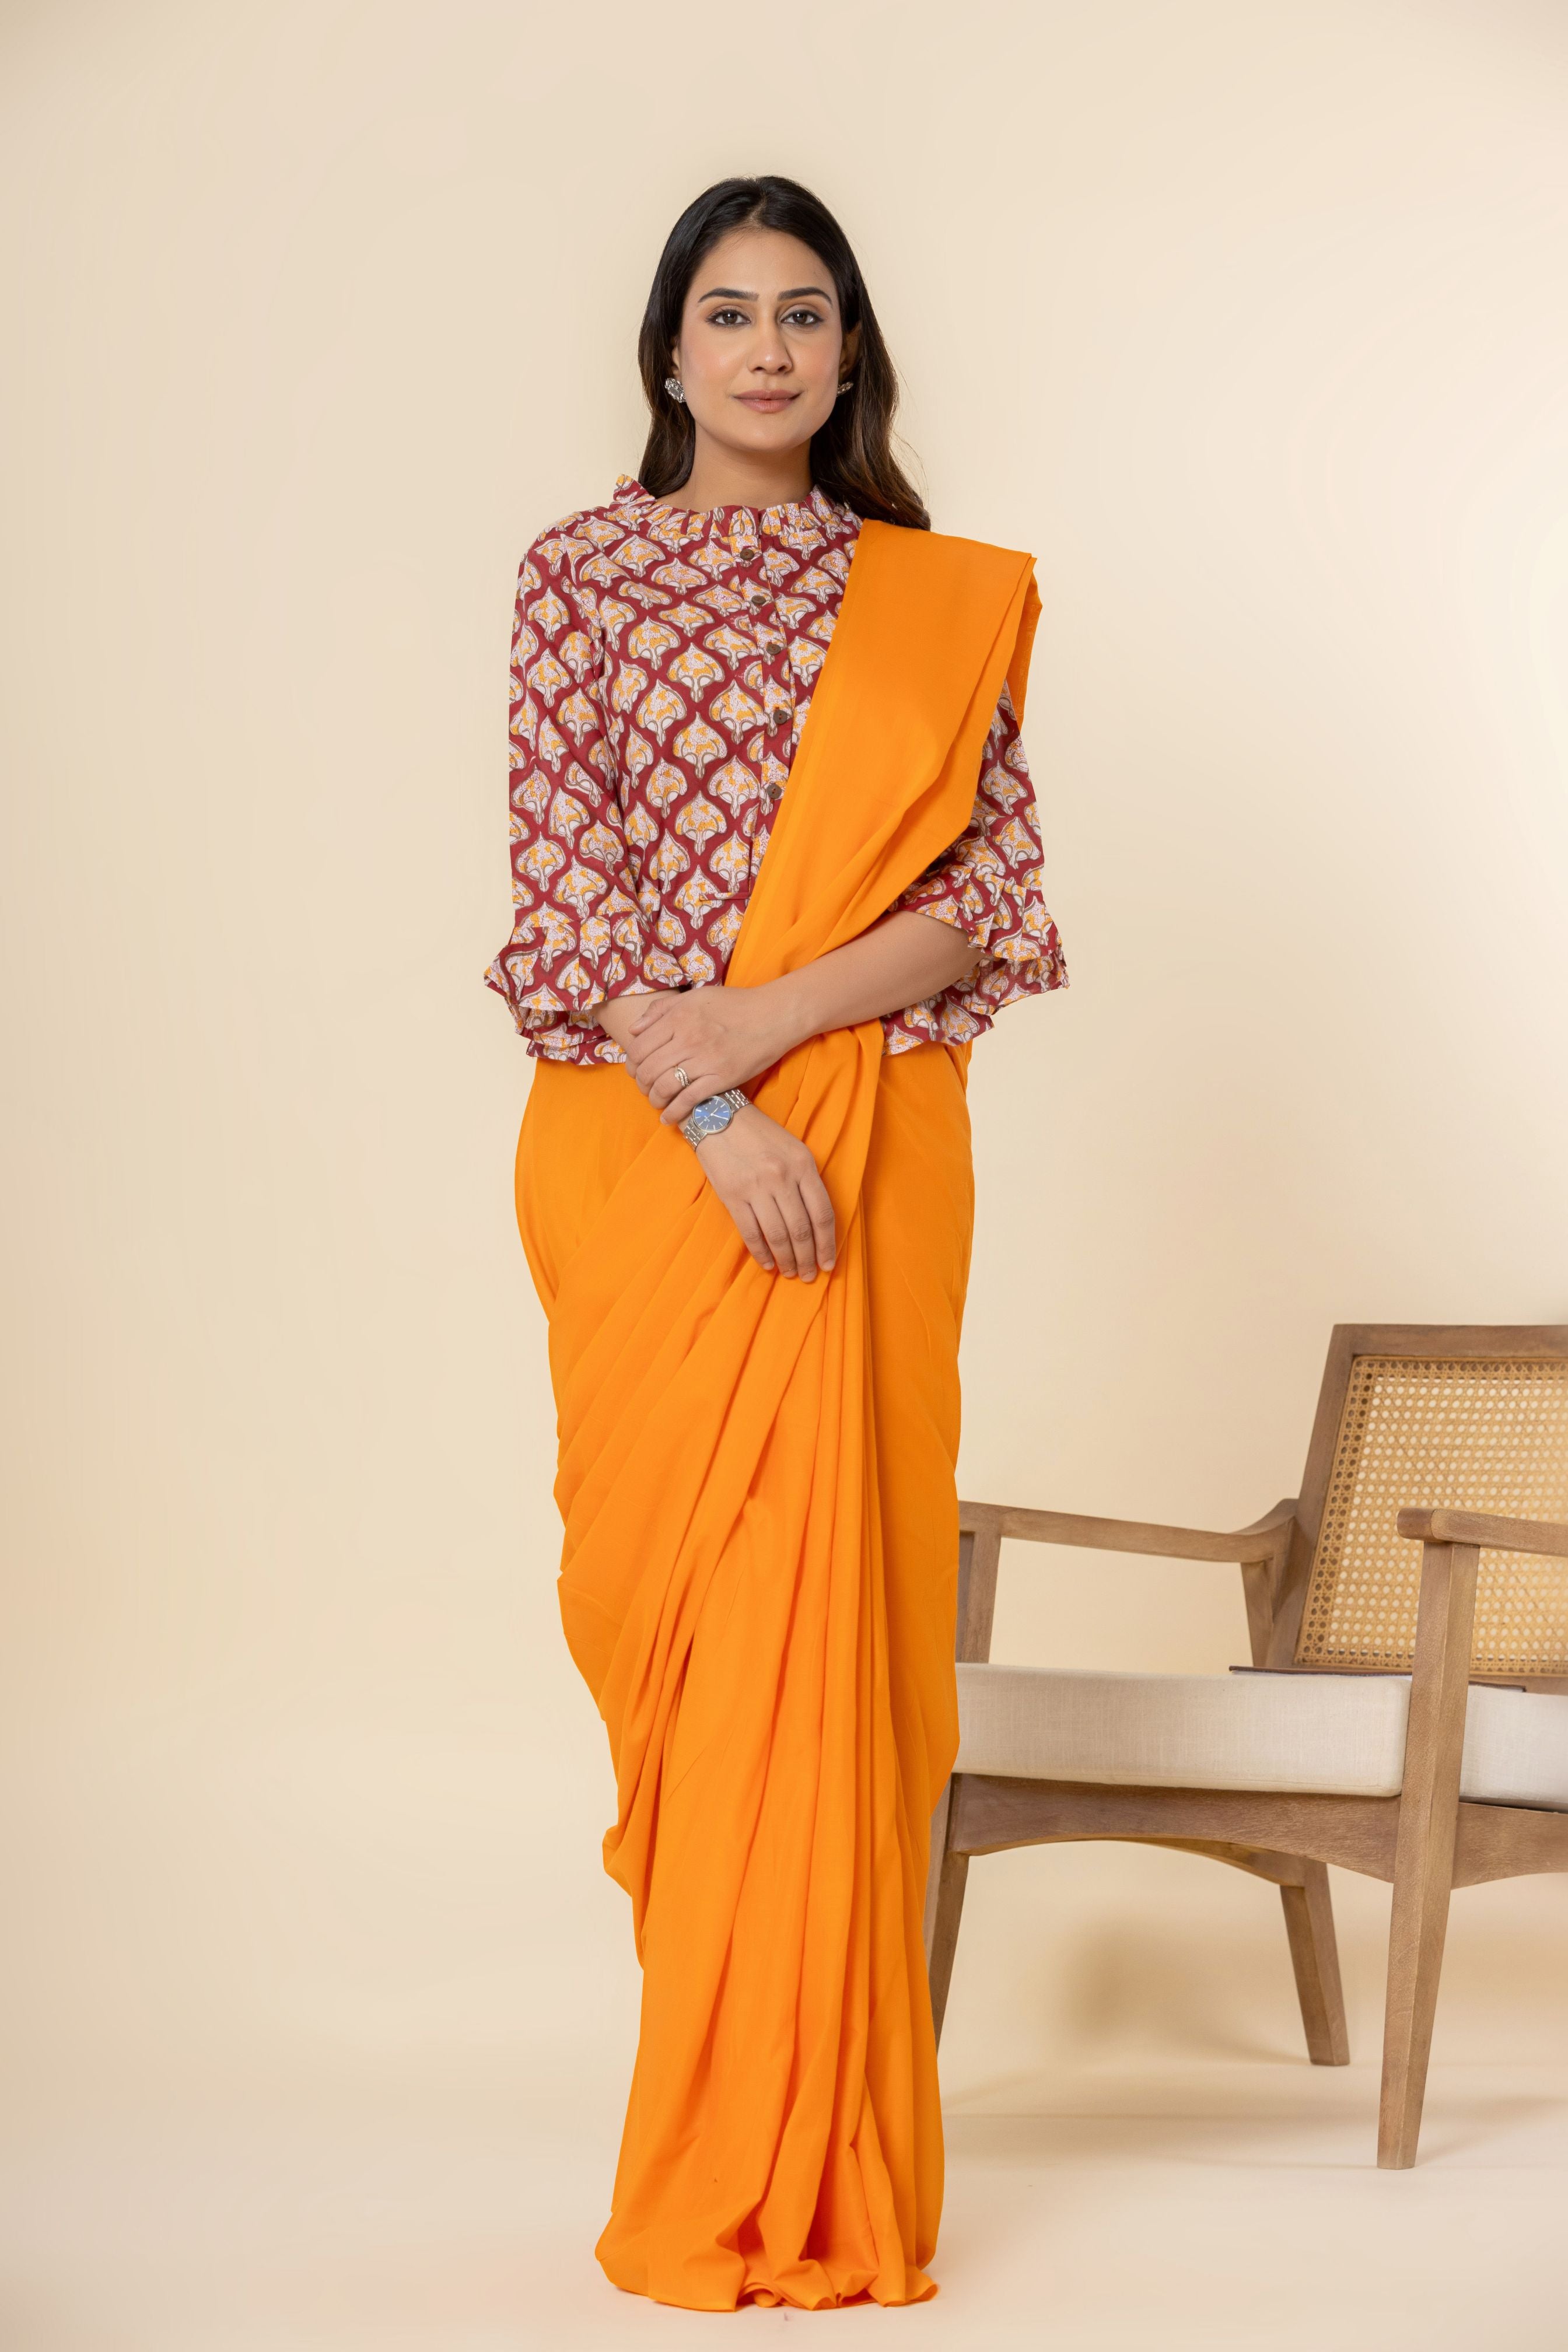 Sunrise Orange Dyed Mul Mul Cotton Saree with Tassels (without Blouse)